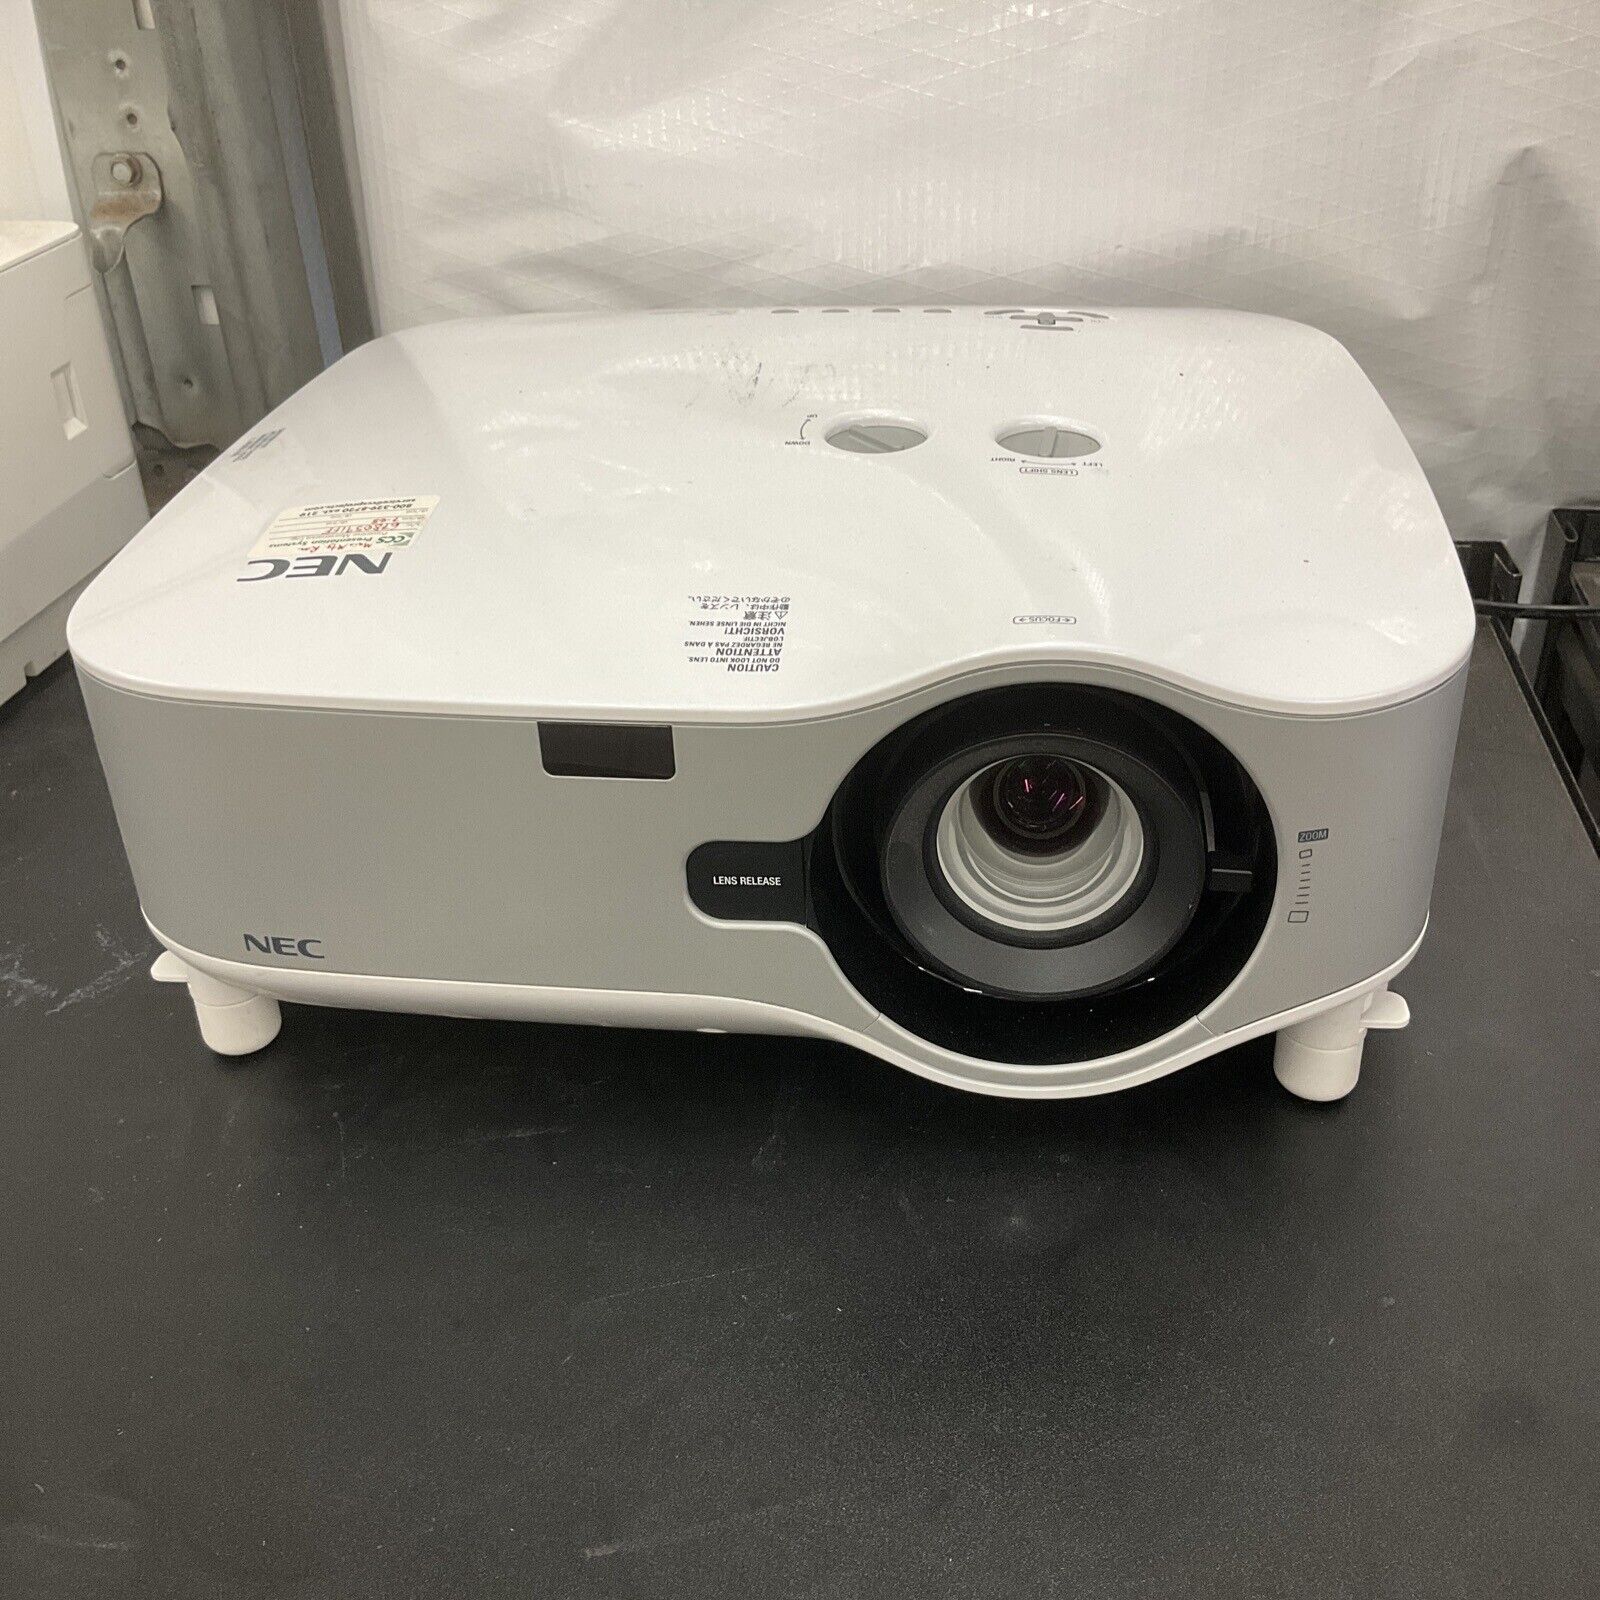 NEC Projector NP 2000- 331 Lamp Hours